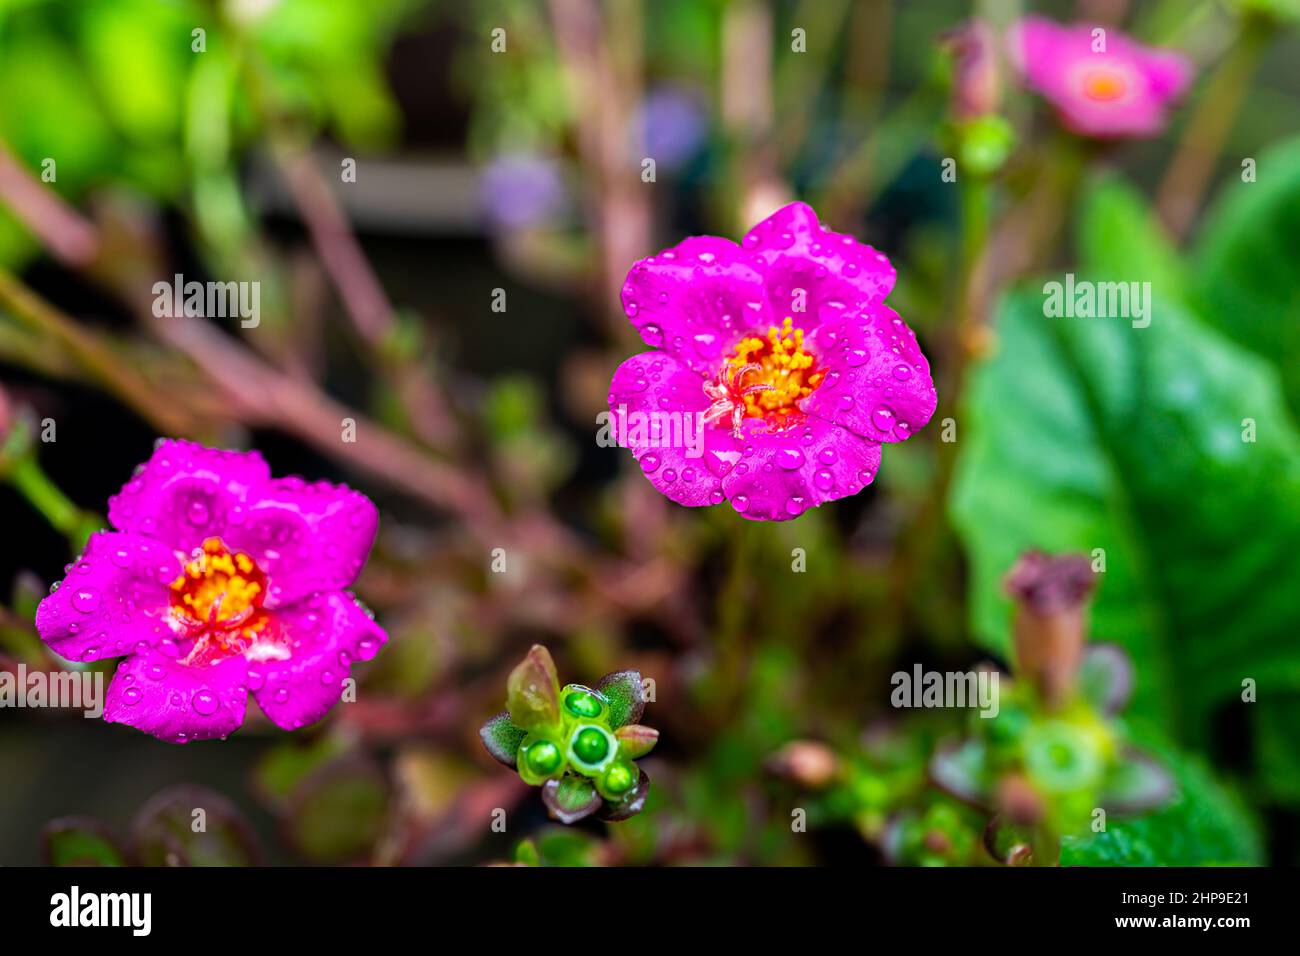 Macro closeup of green leaves and pink purple flowers of edible purslane plant in pot flowerpot outside blooming in garden with texture of dew water d Stock Photo